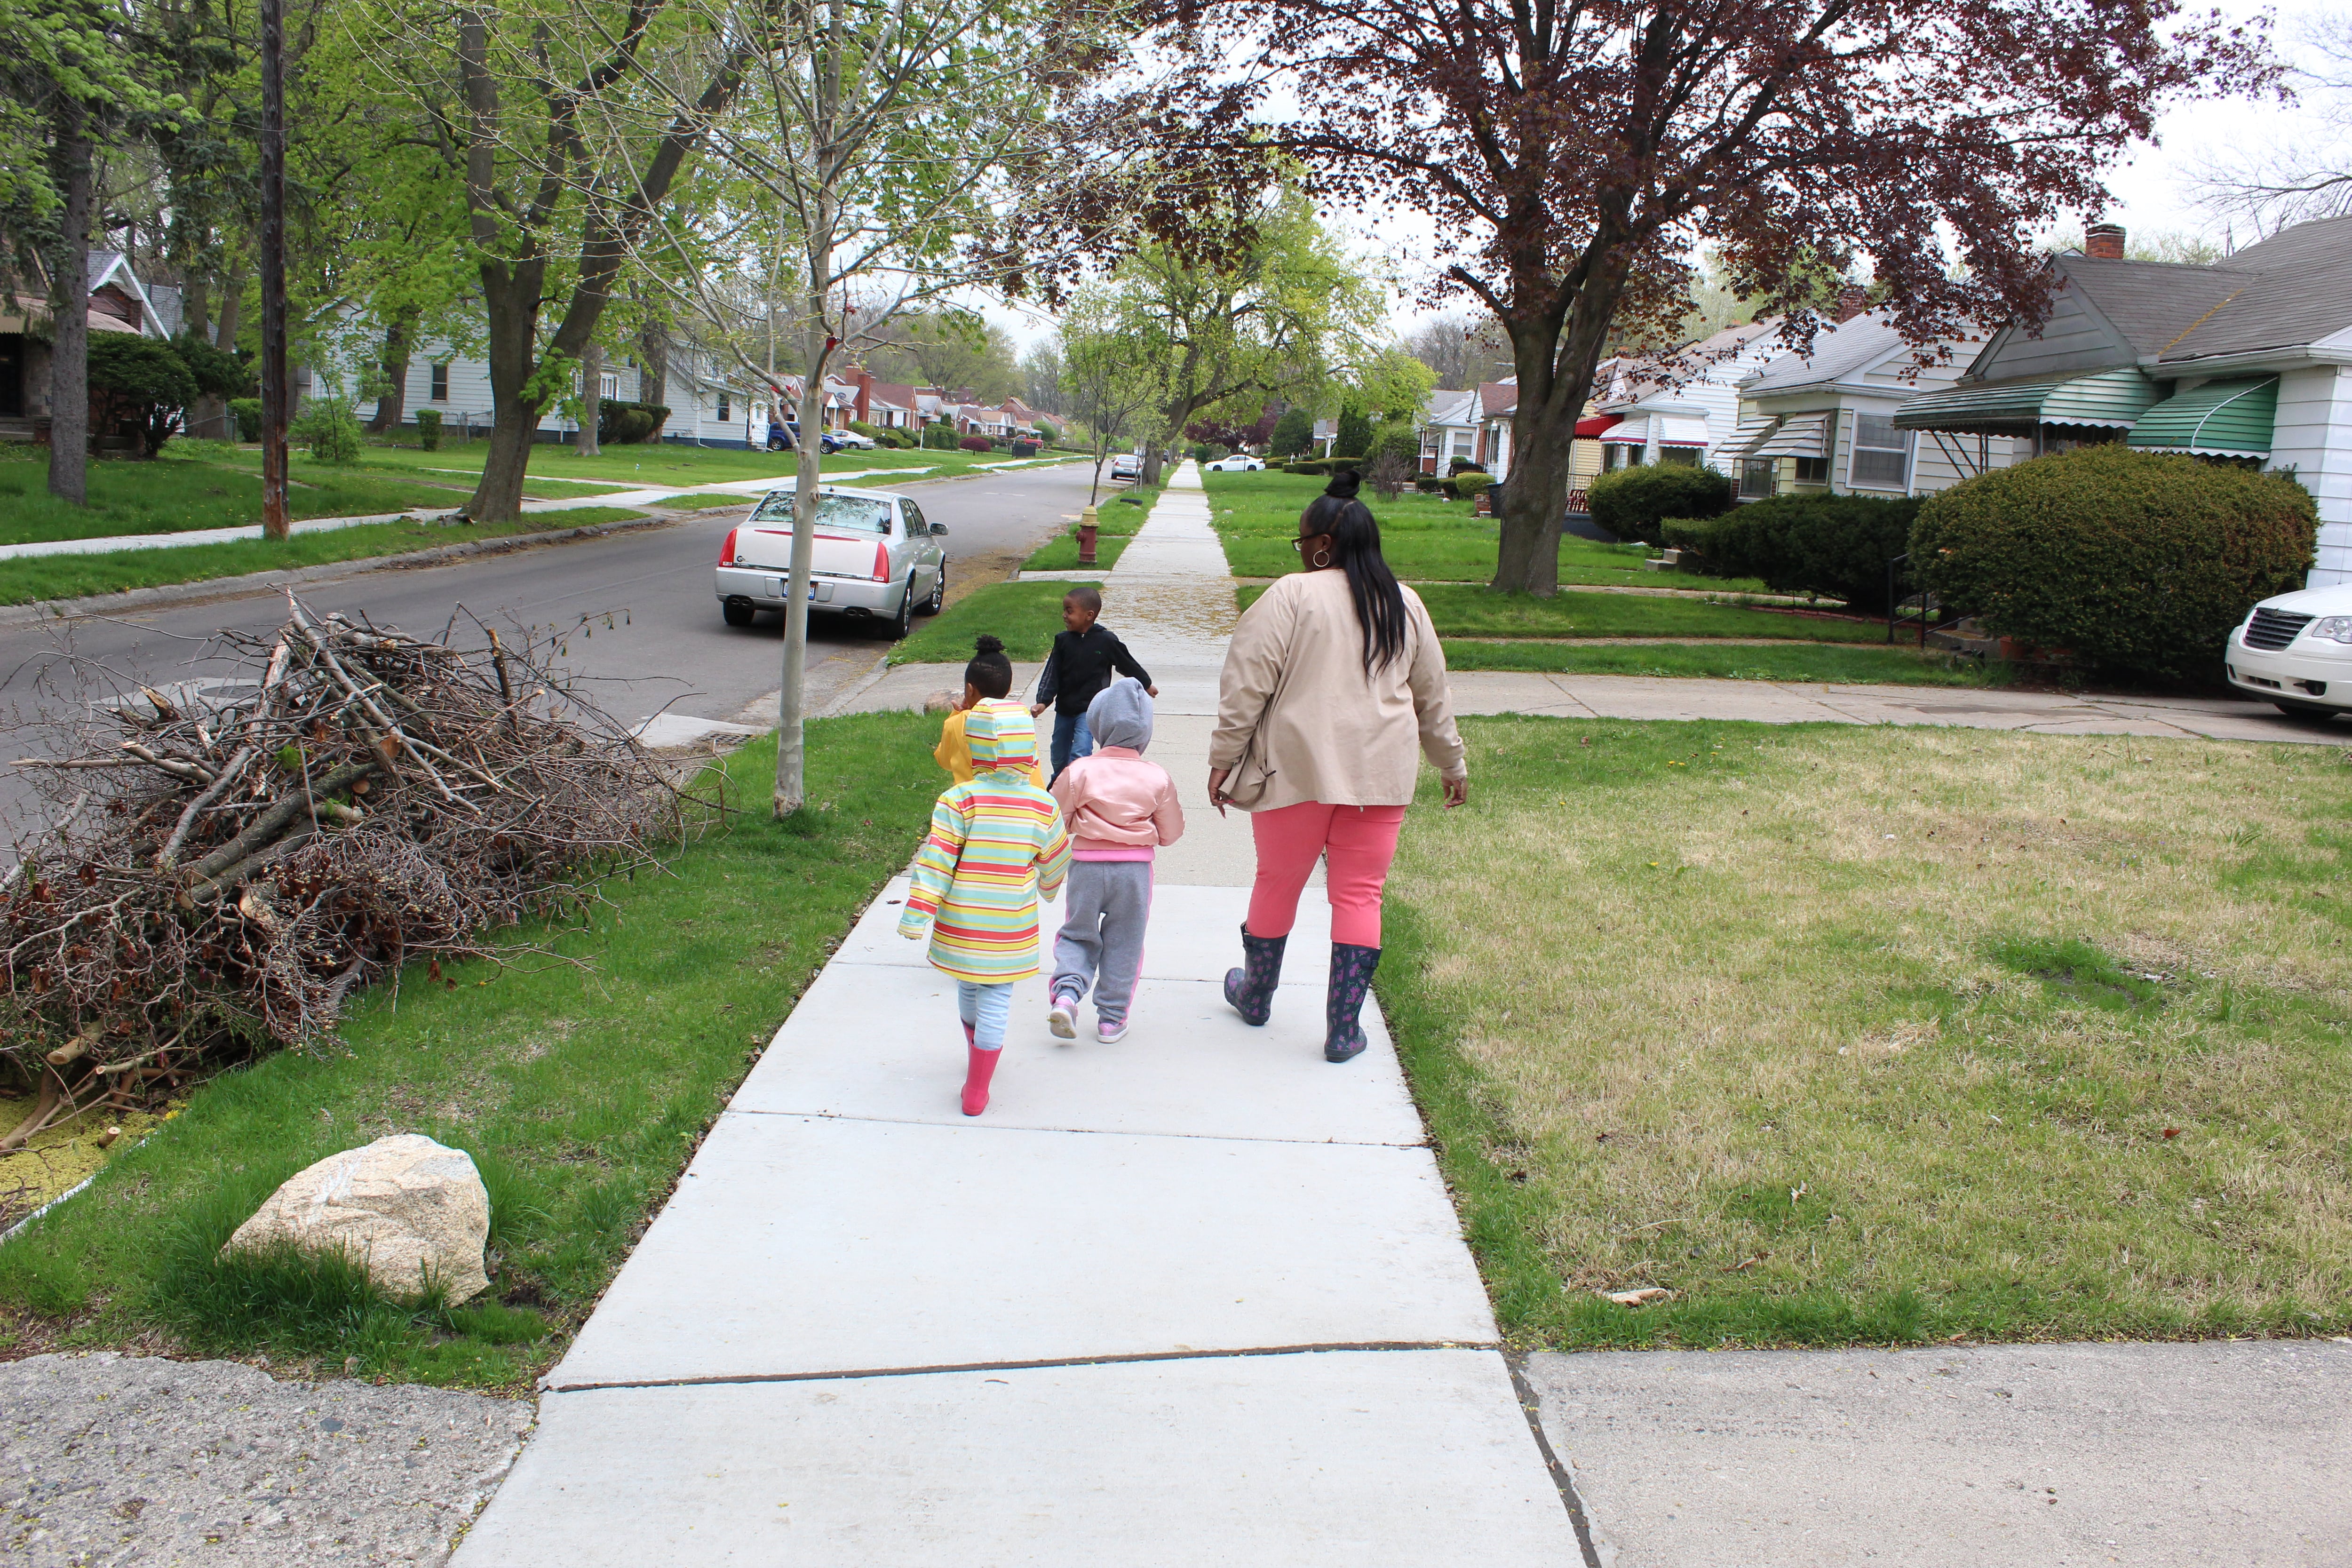 A typical day in Cindy Lester’s preschool classroom includes an outdoor walk in the surrounding Brightmoor neighborhood.